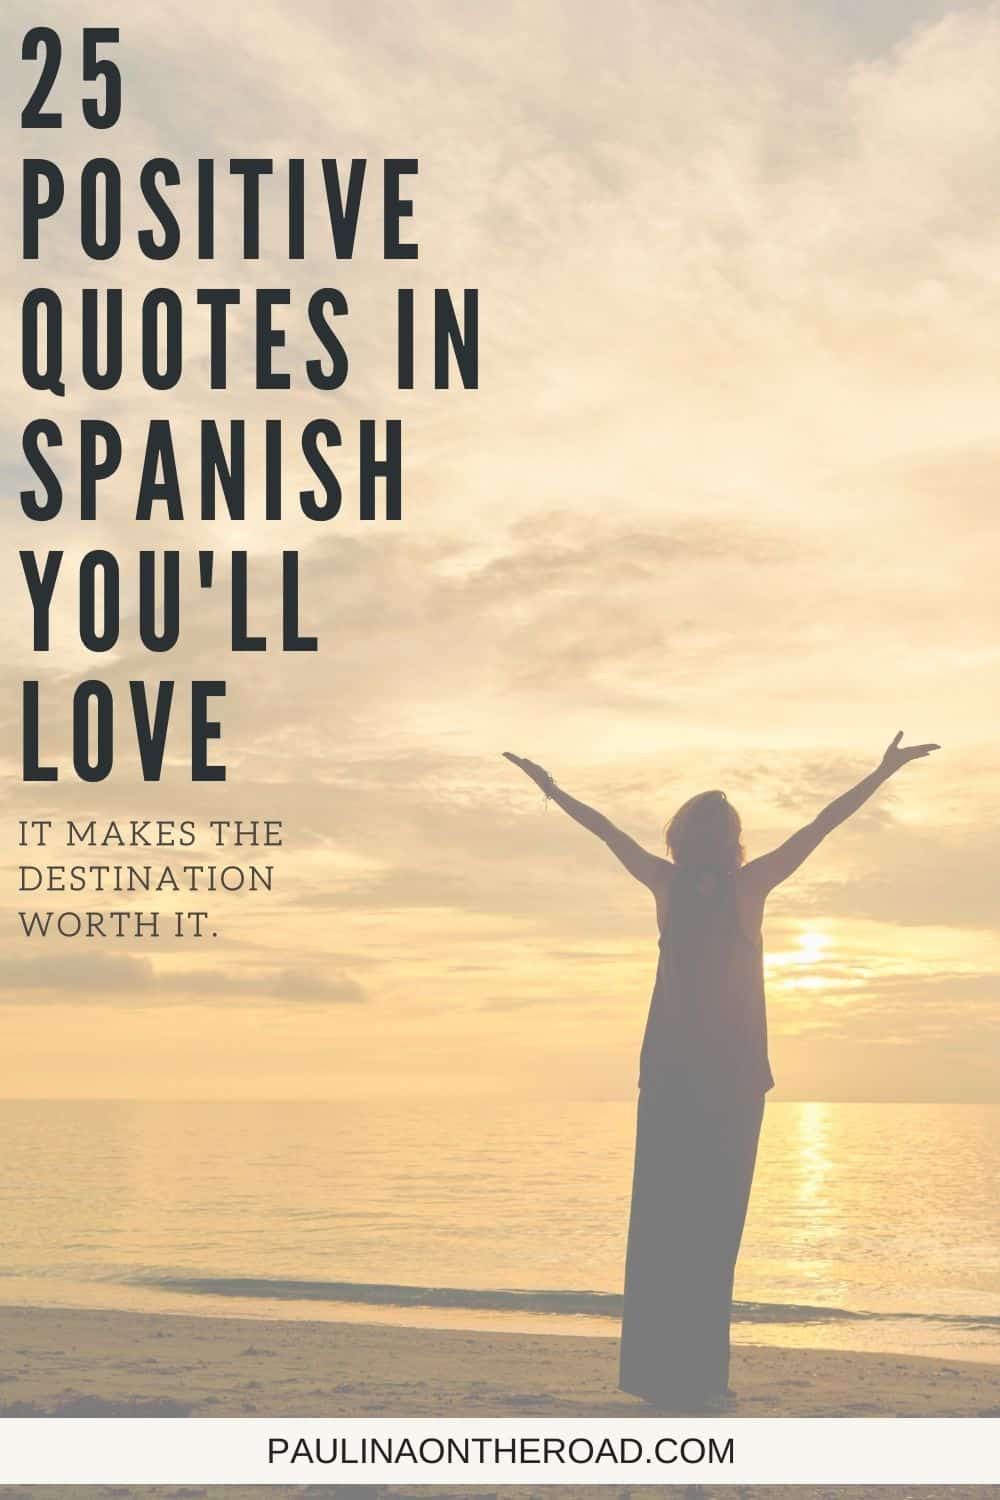 25 Positive Quotes in Spanish That Will Make Your Day! - Paulina on the